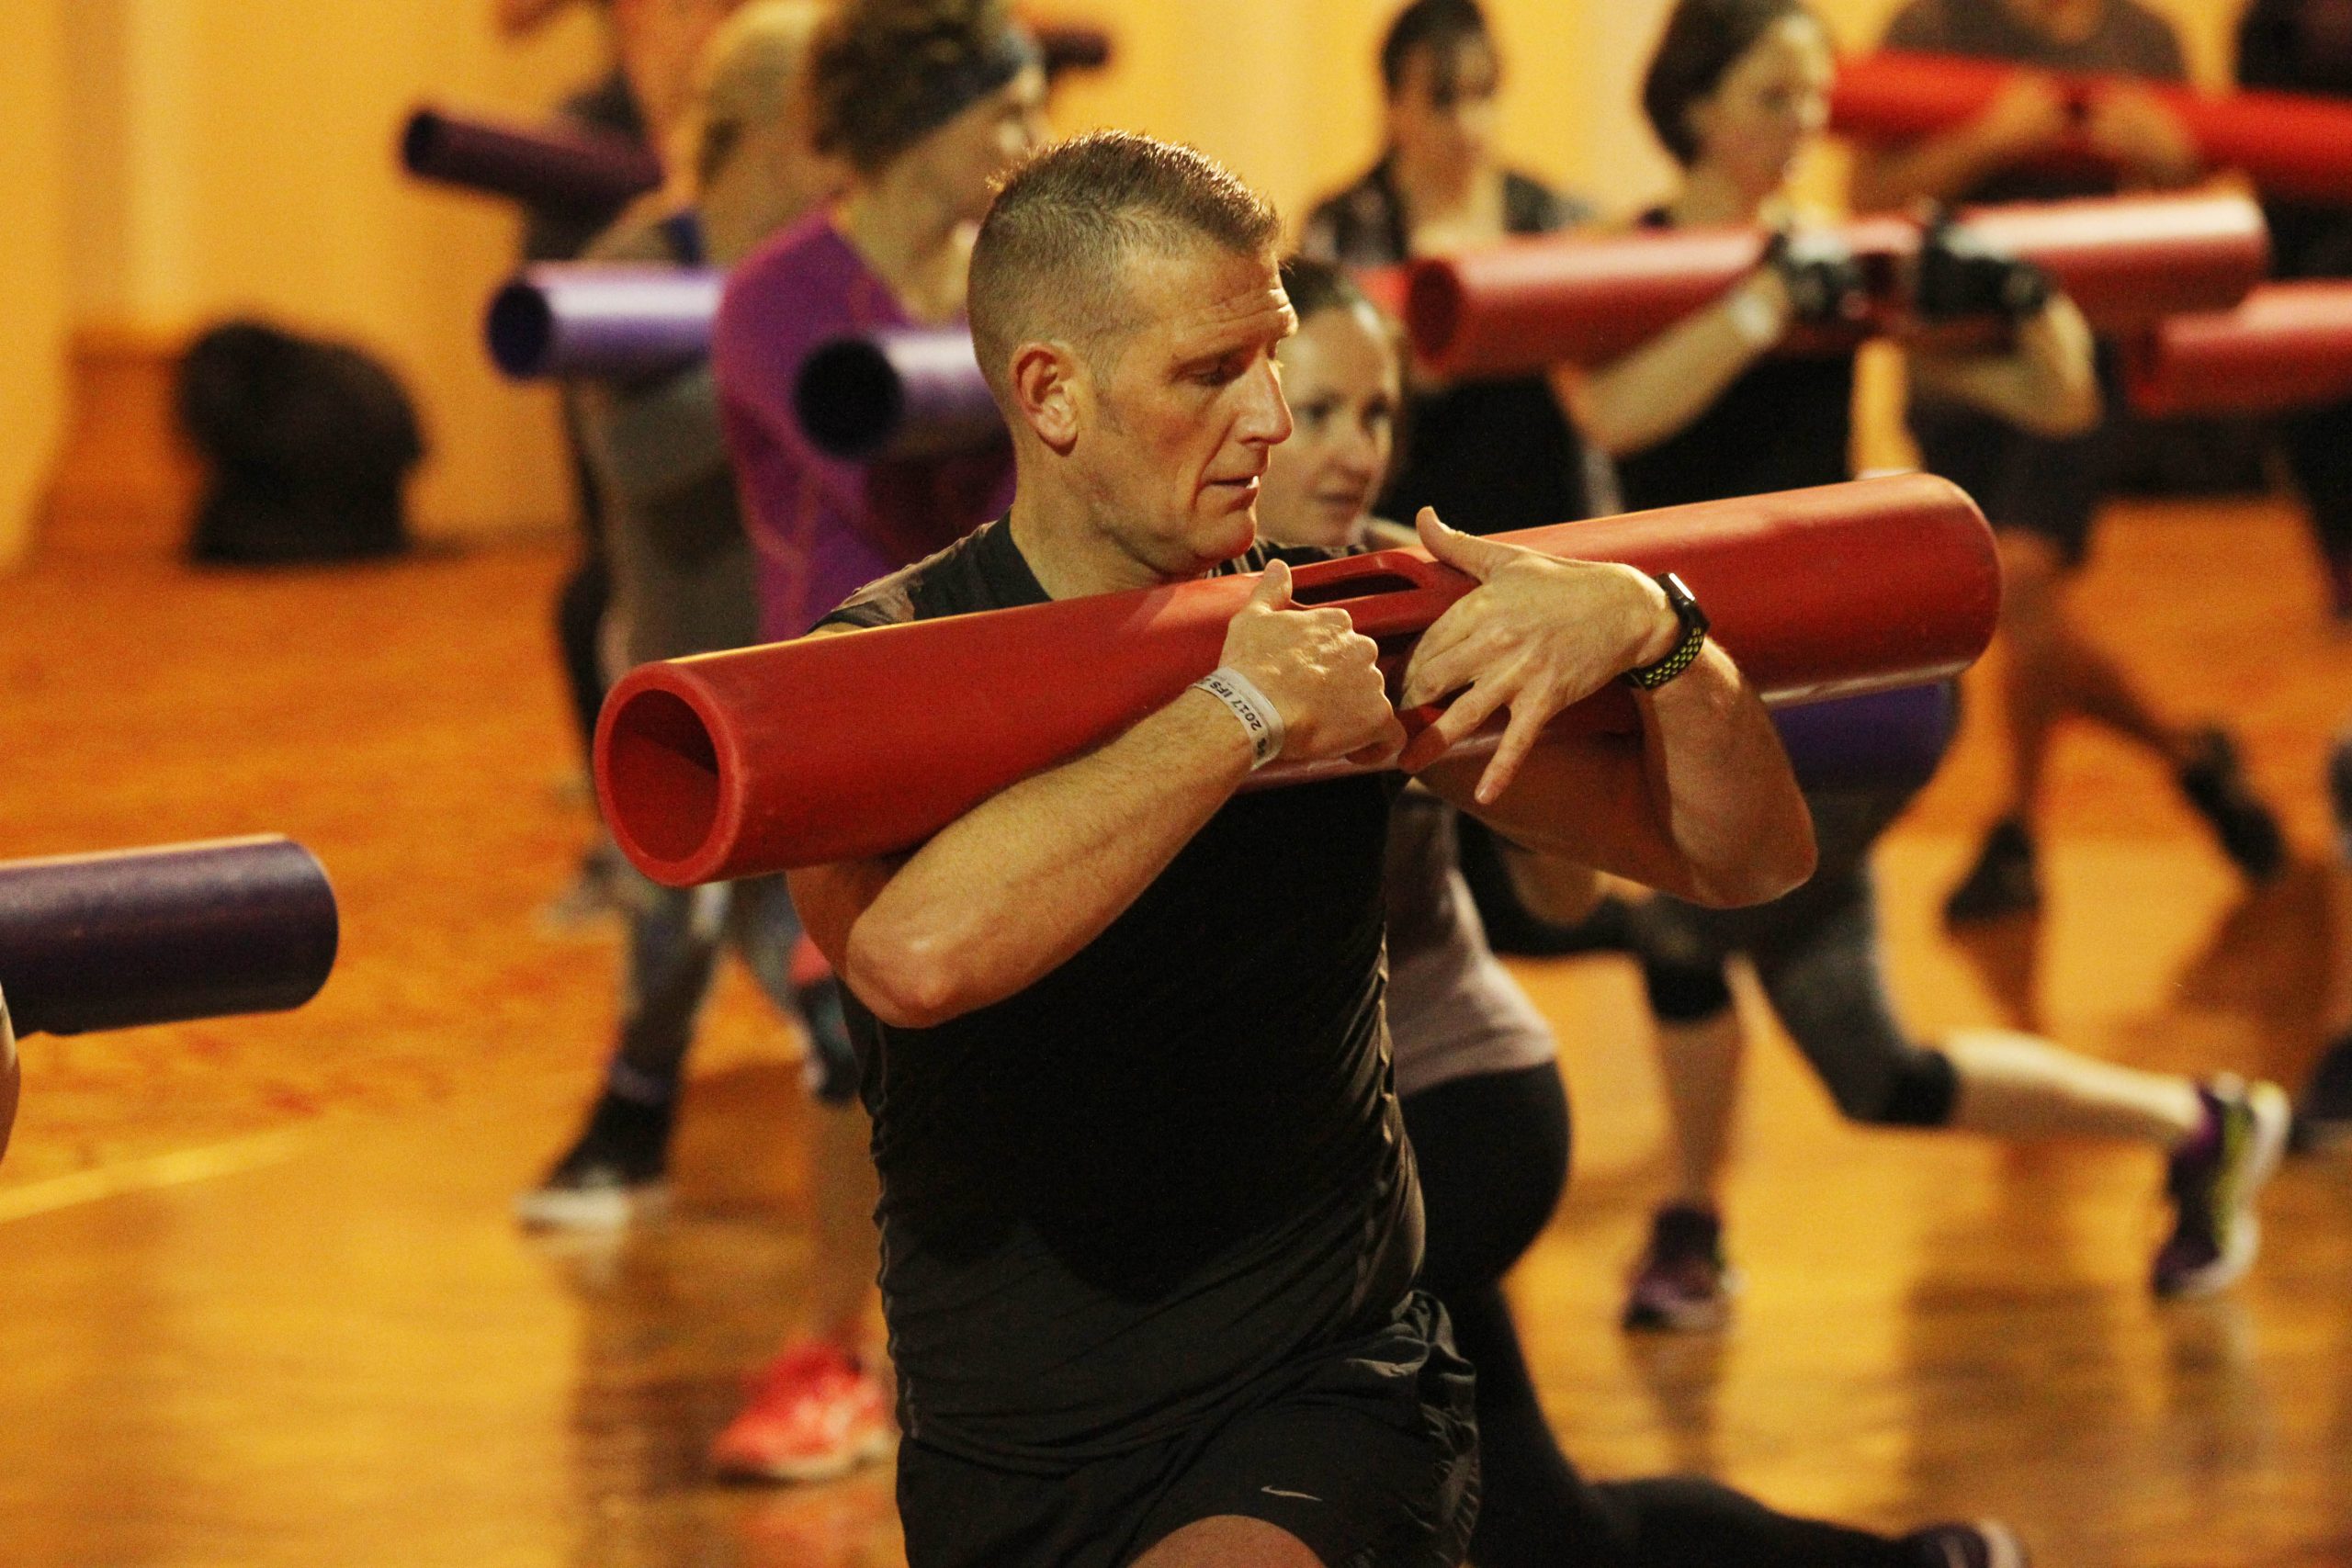 Why you should attend the MOSSA UK TOUR - FitPro Blog